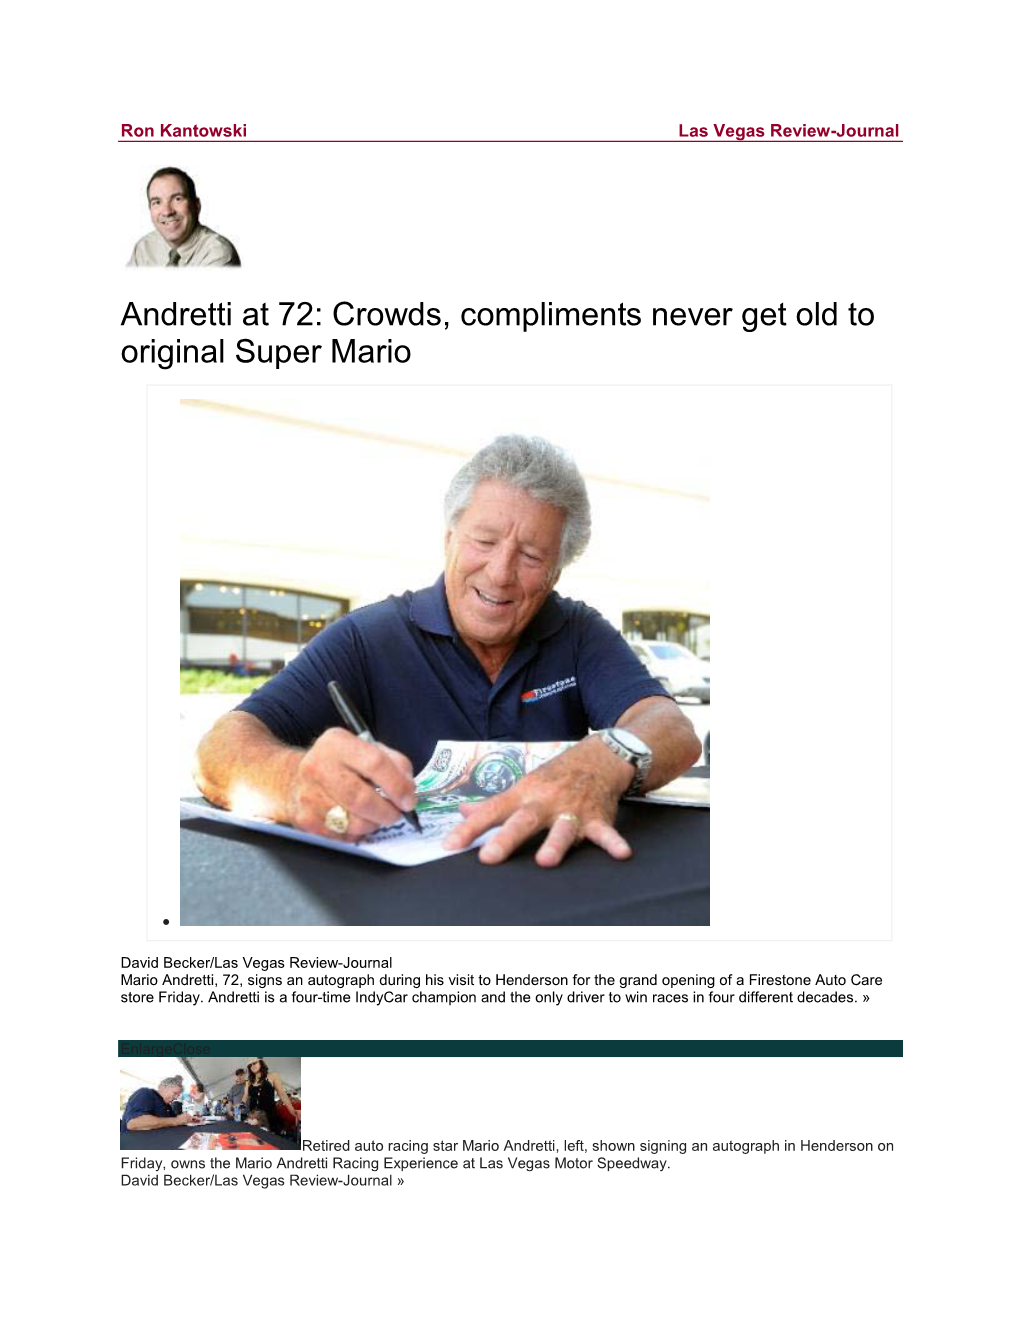 Andretti at 72: Crowds, Compliments Never Get Old to Original Super Mario